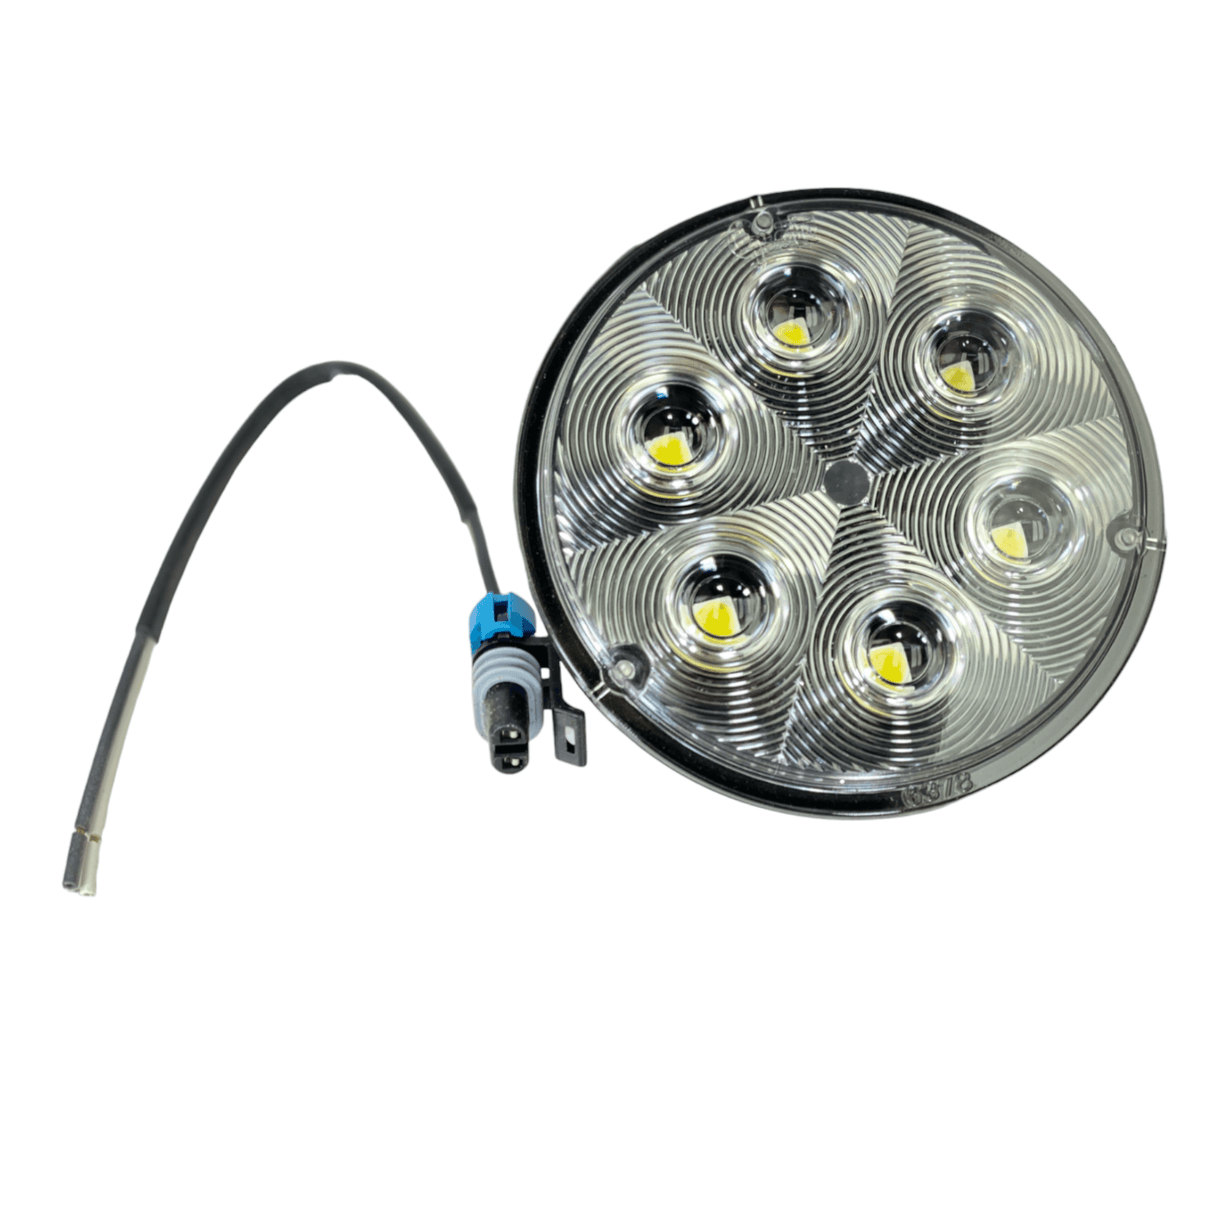 63971 Genuine Grote Trilliant 36 Led Work Lamp - Truck To Trailer